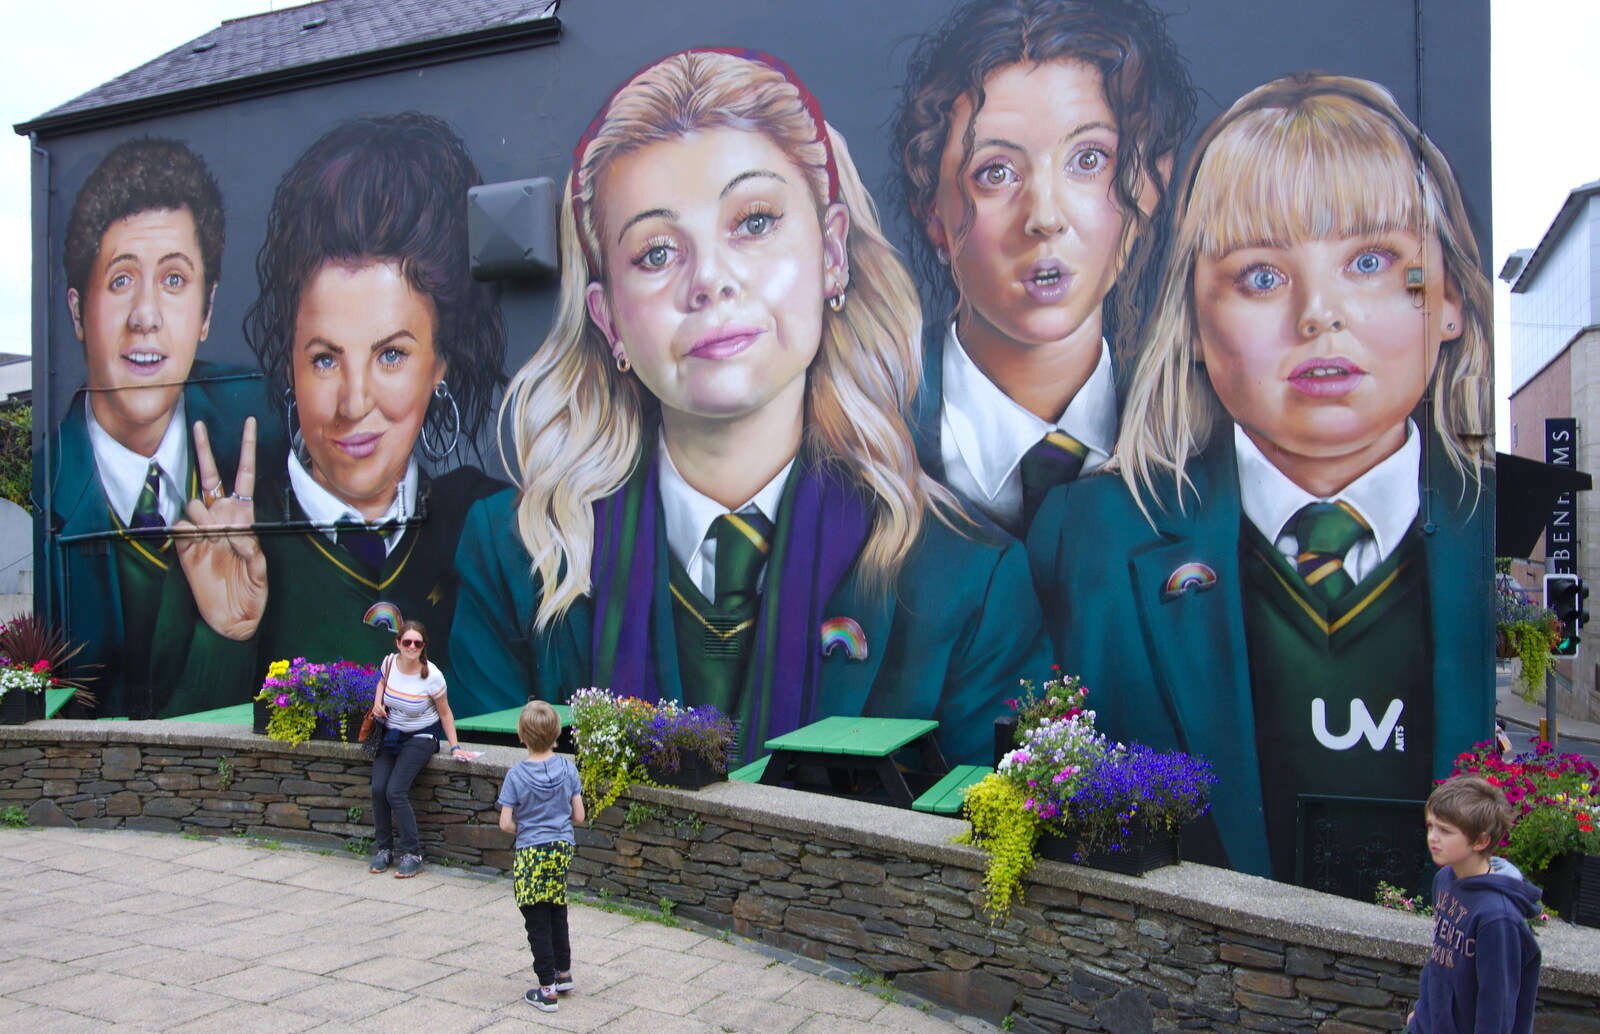 The Derry Girls mural, by UV Arts from A Day in Derry, County Londonderry, Northern Ireland - 15th August 2019